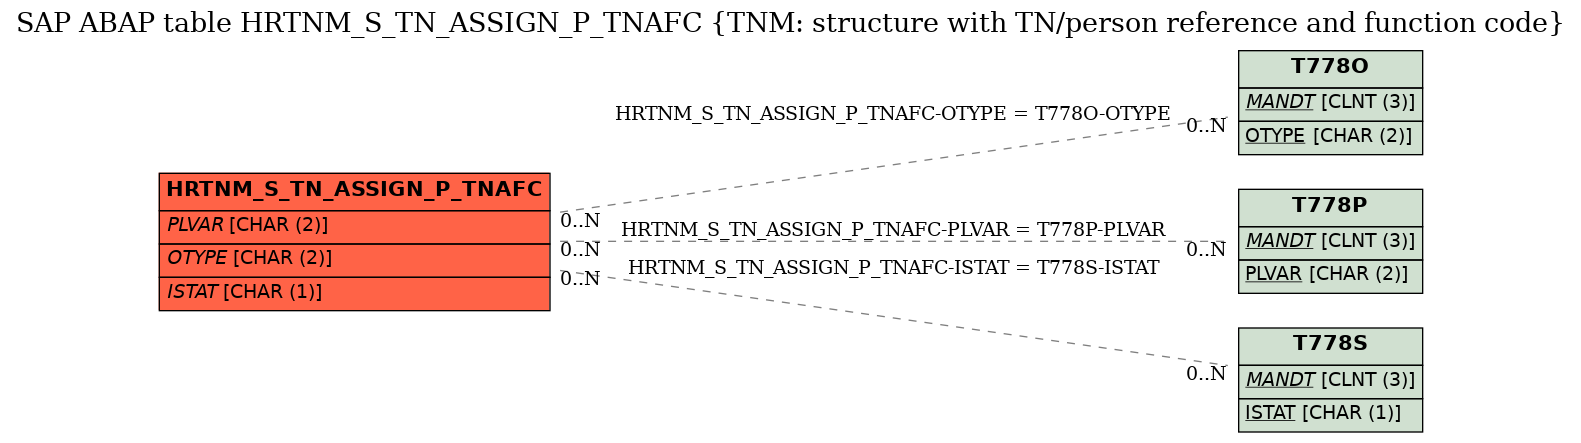 E-R Diagram for table HRTNM_S_TN_ASSIGN_P_TNAFC (TNM: structure with TN/person reference and function code)